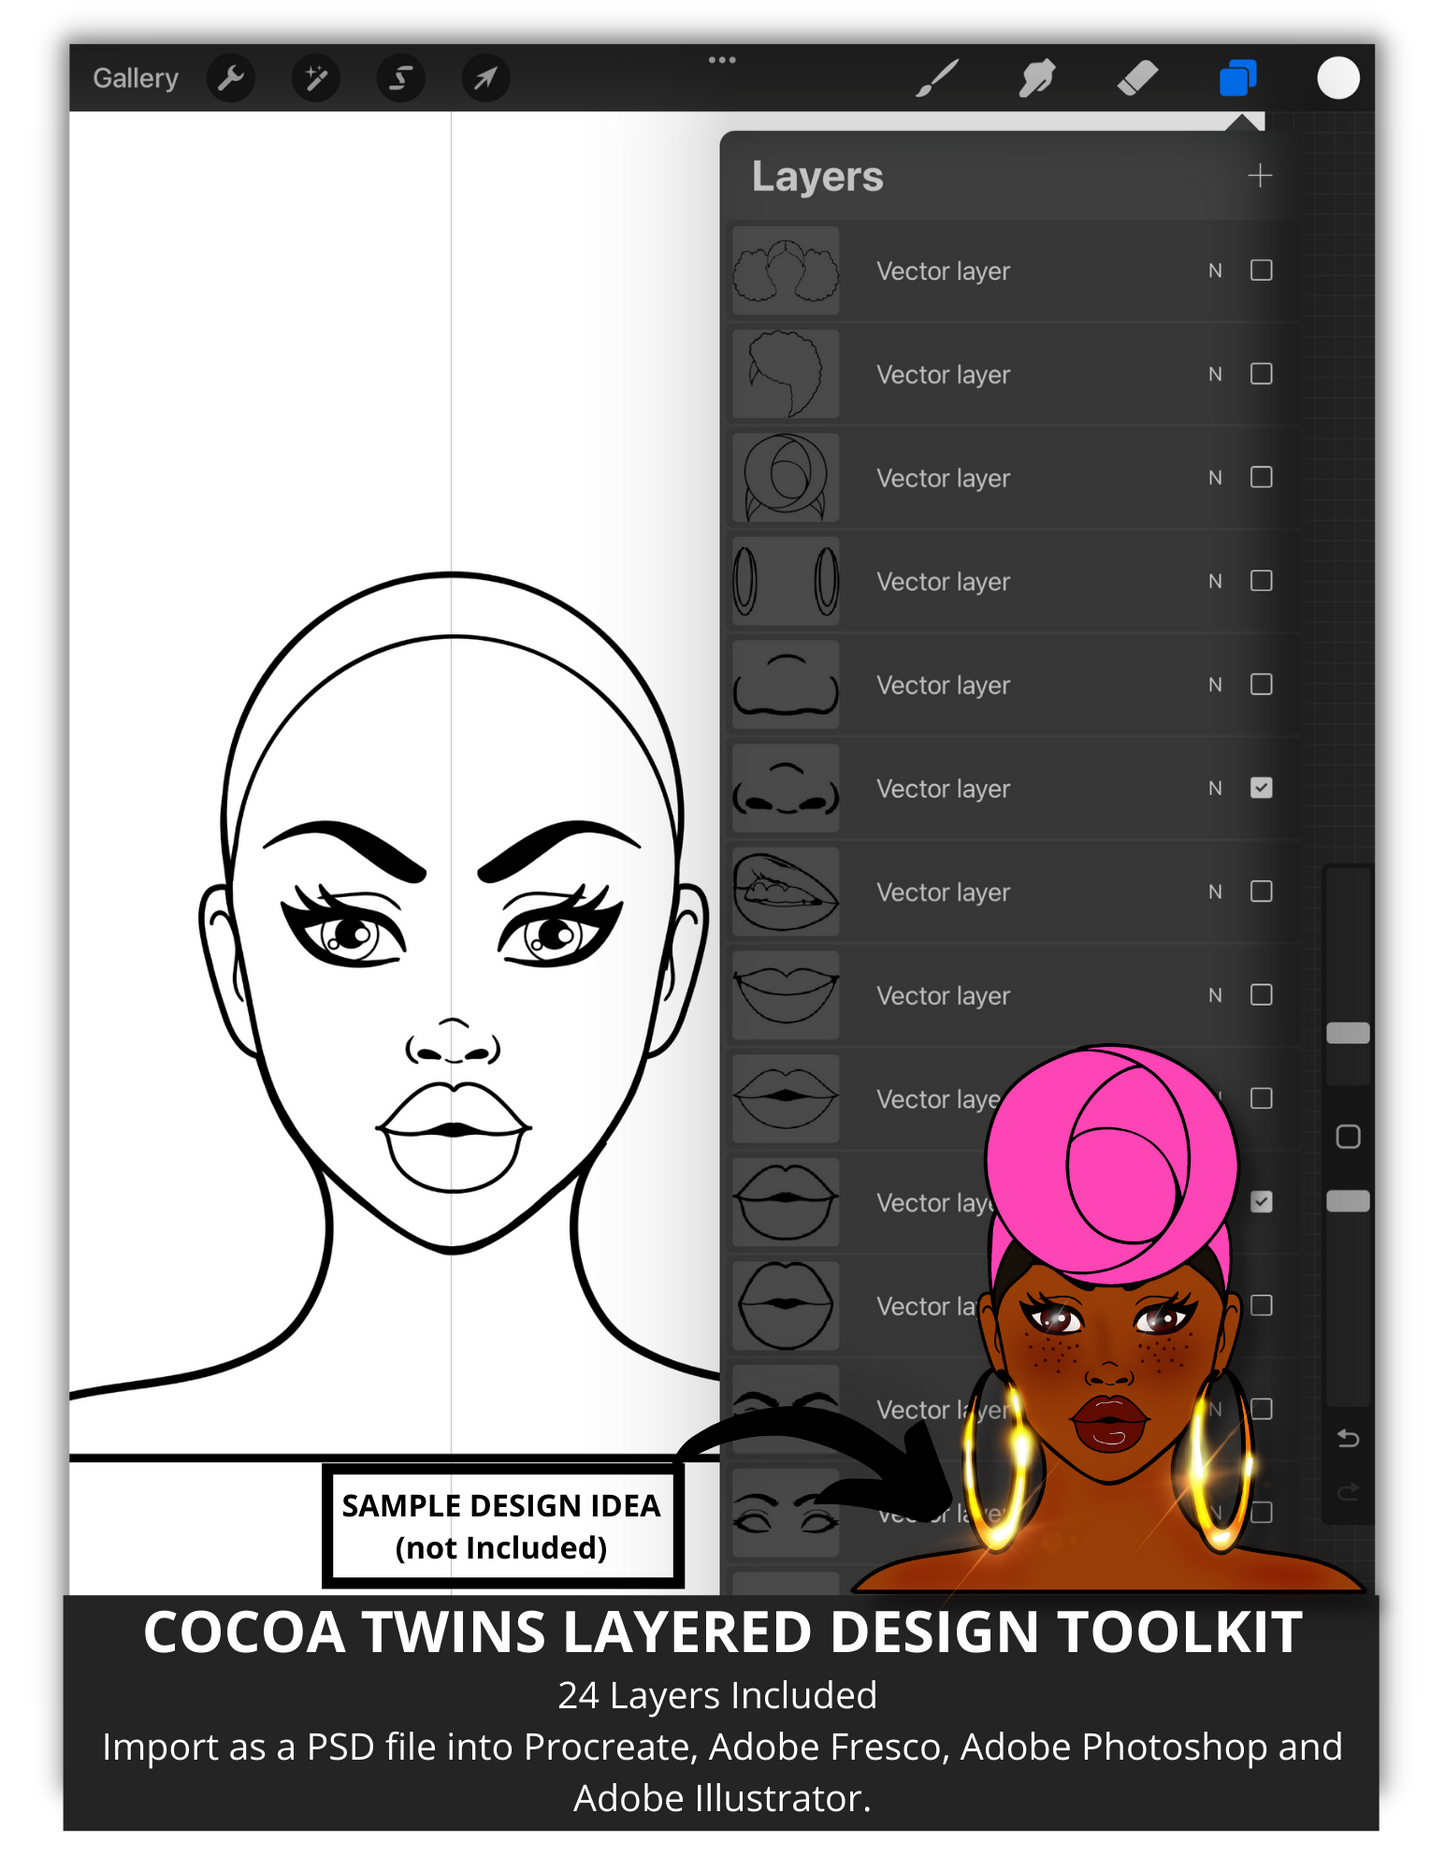 032022LCDT-01 | Layered Canvas Design Toolkit